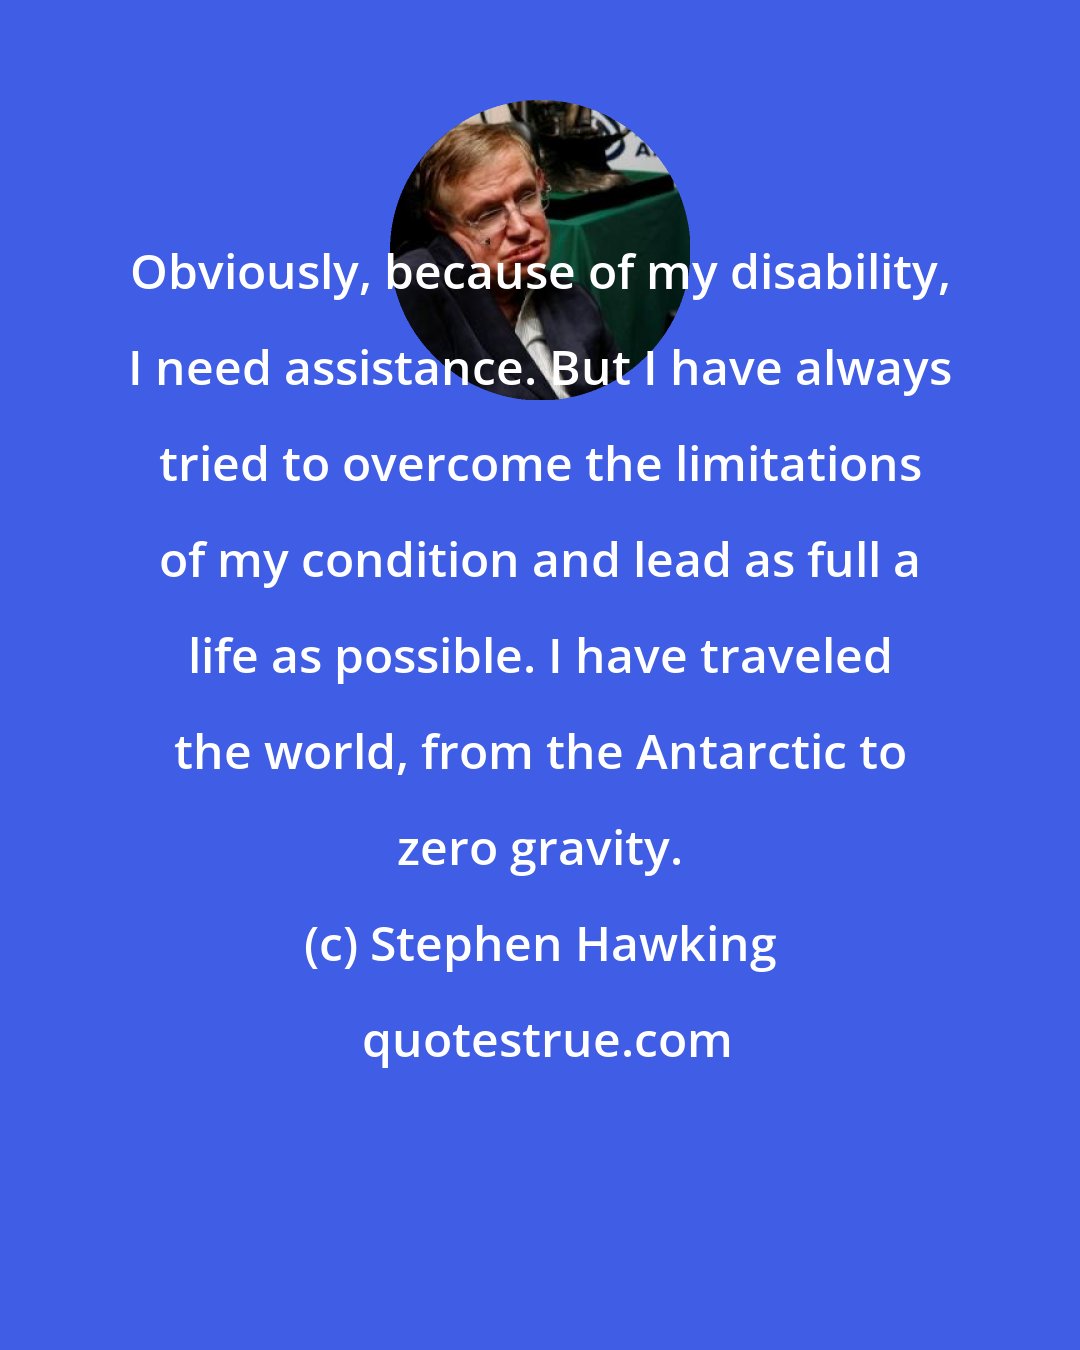 Stephen Hawking: Obviously, because of my disability, I need assistance. But I have always tried to overcome the limitations of my condition and lead as full a life as possible. I have traveled the world, from the Antarctic to zero gravity.